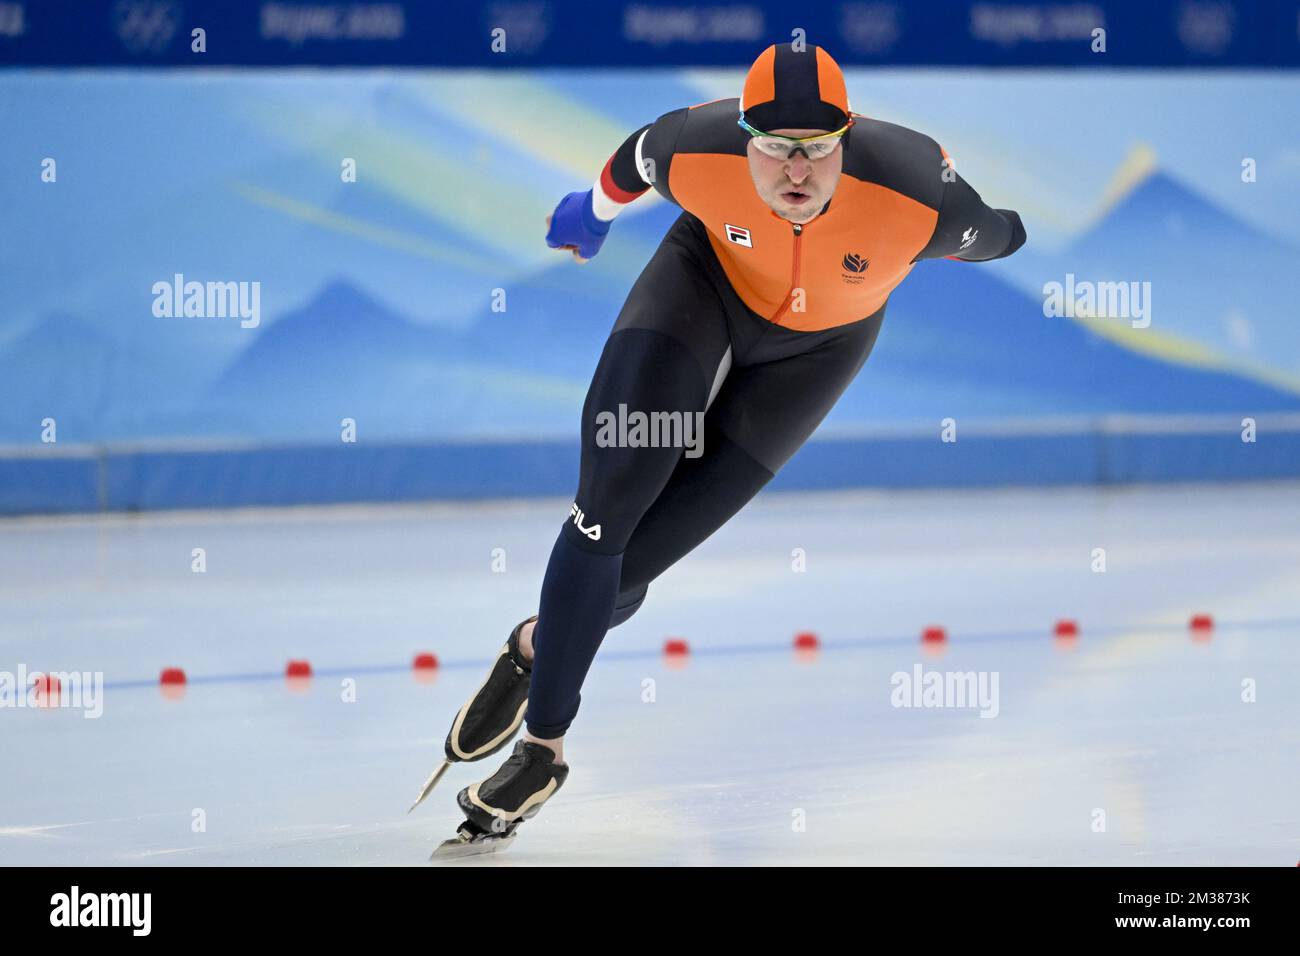 Dutch speed skater Sven Kramer pictured in action during the men's 5000m speed skating event, at the Beijing 2022 Winter Olympics in Beijing, China, Sunday 06 February 2022. The winter Olympics are taking place from 4 February to 20 February 2022. BELGA PHOTO LAURIE DIEFFEMBACQ Stock Photo